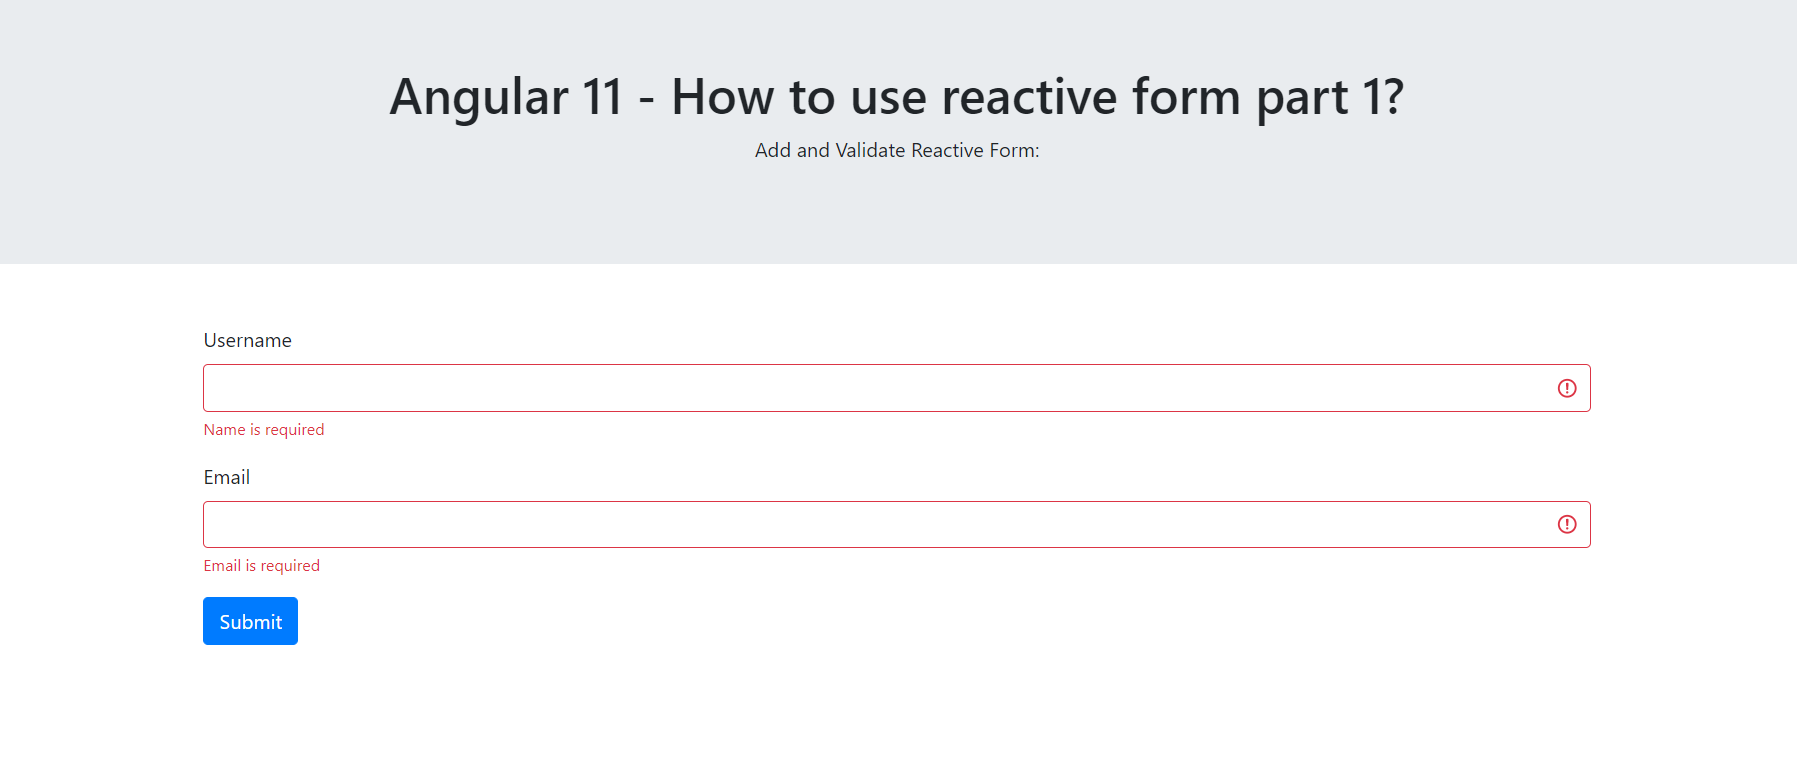 Angular 11 - How to use reactive form part 1?